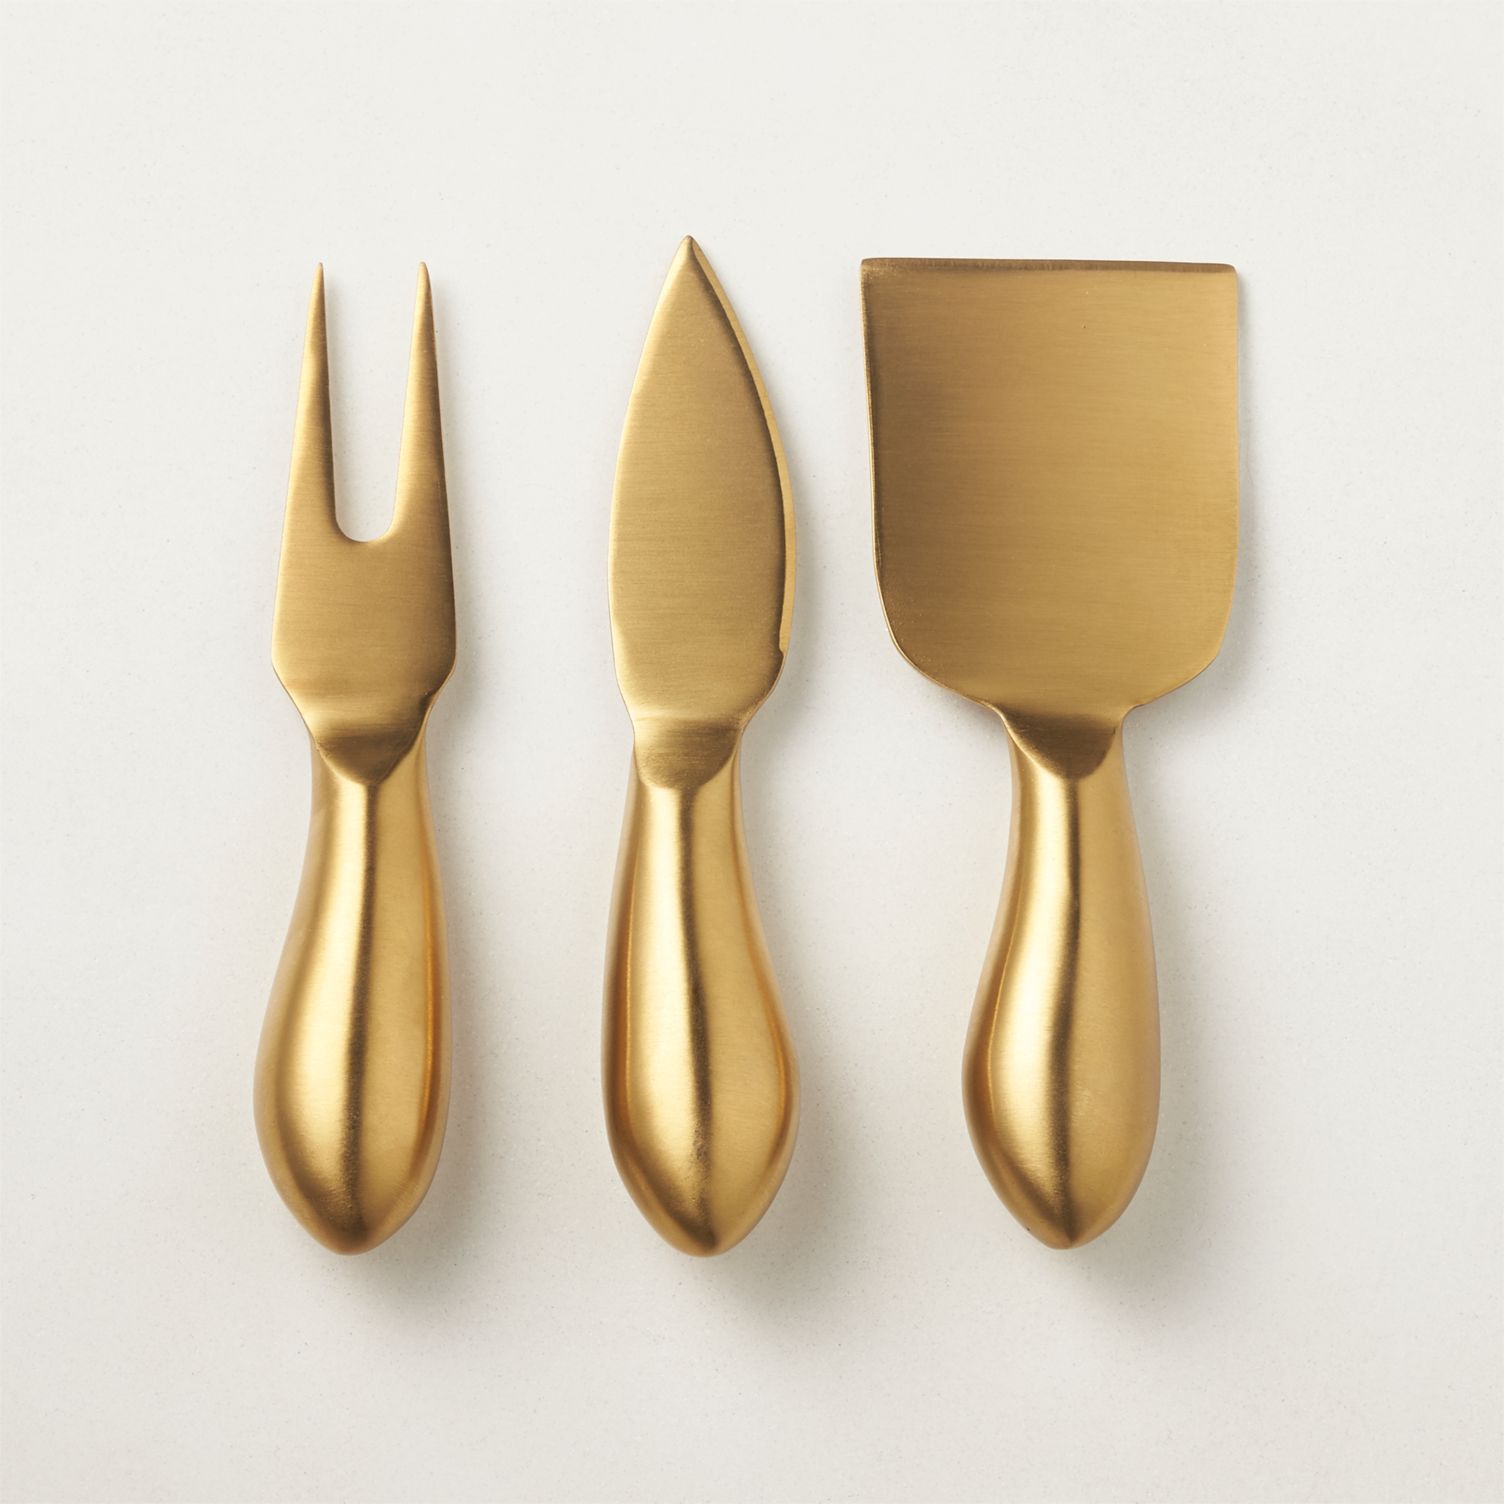 Set of 3 gold cheese knives